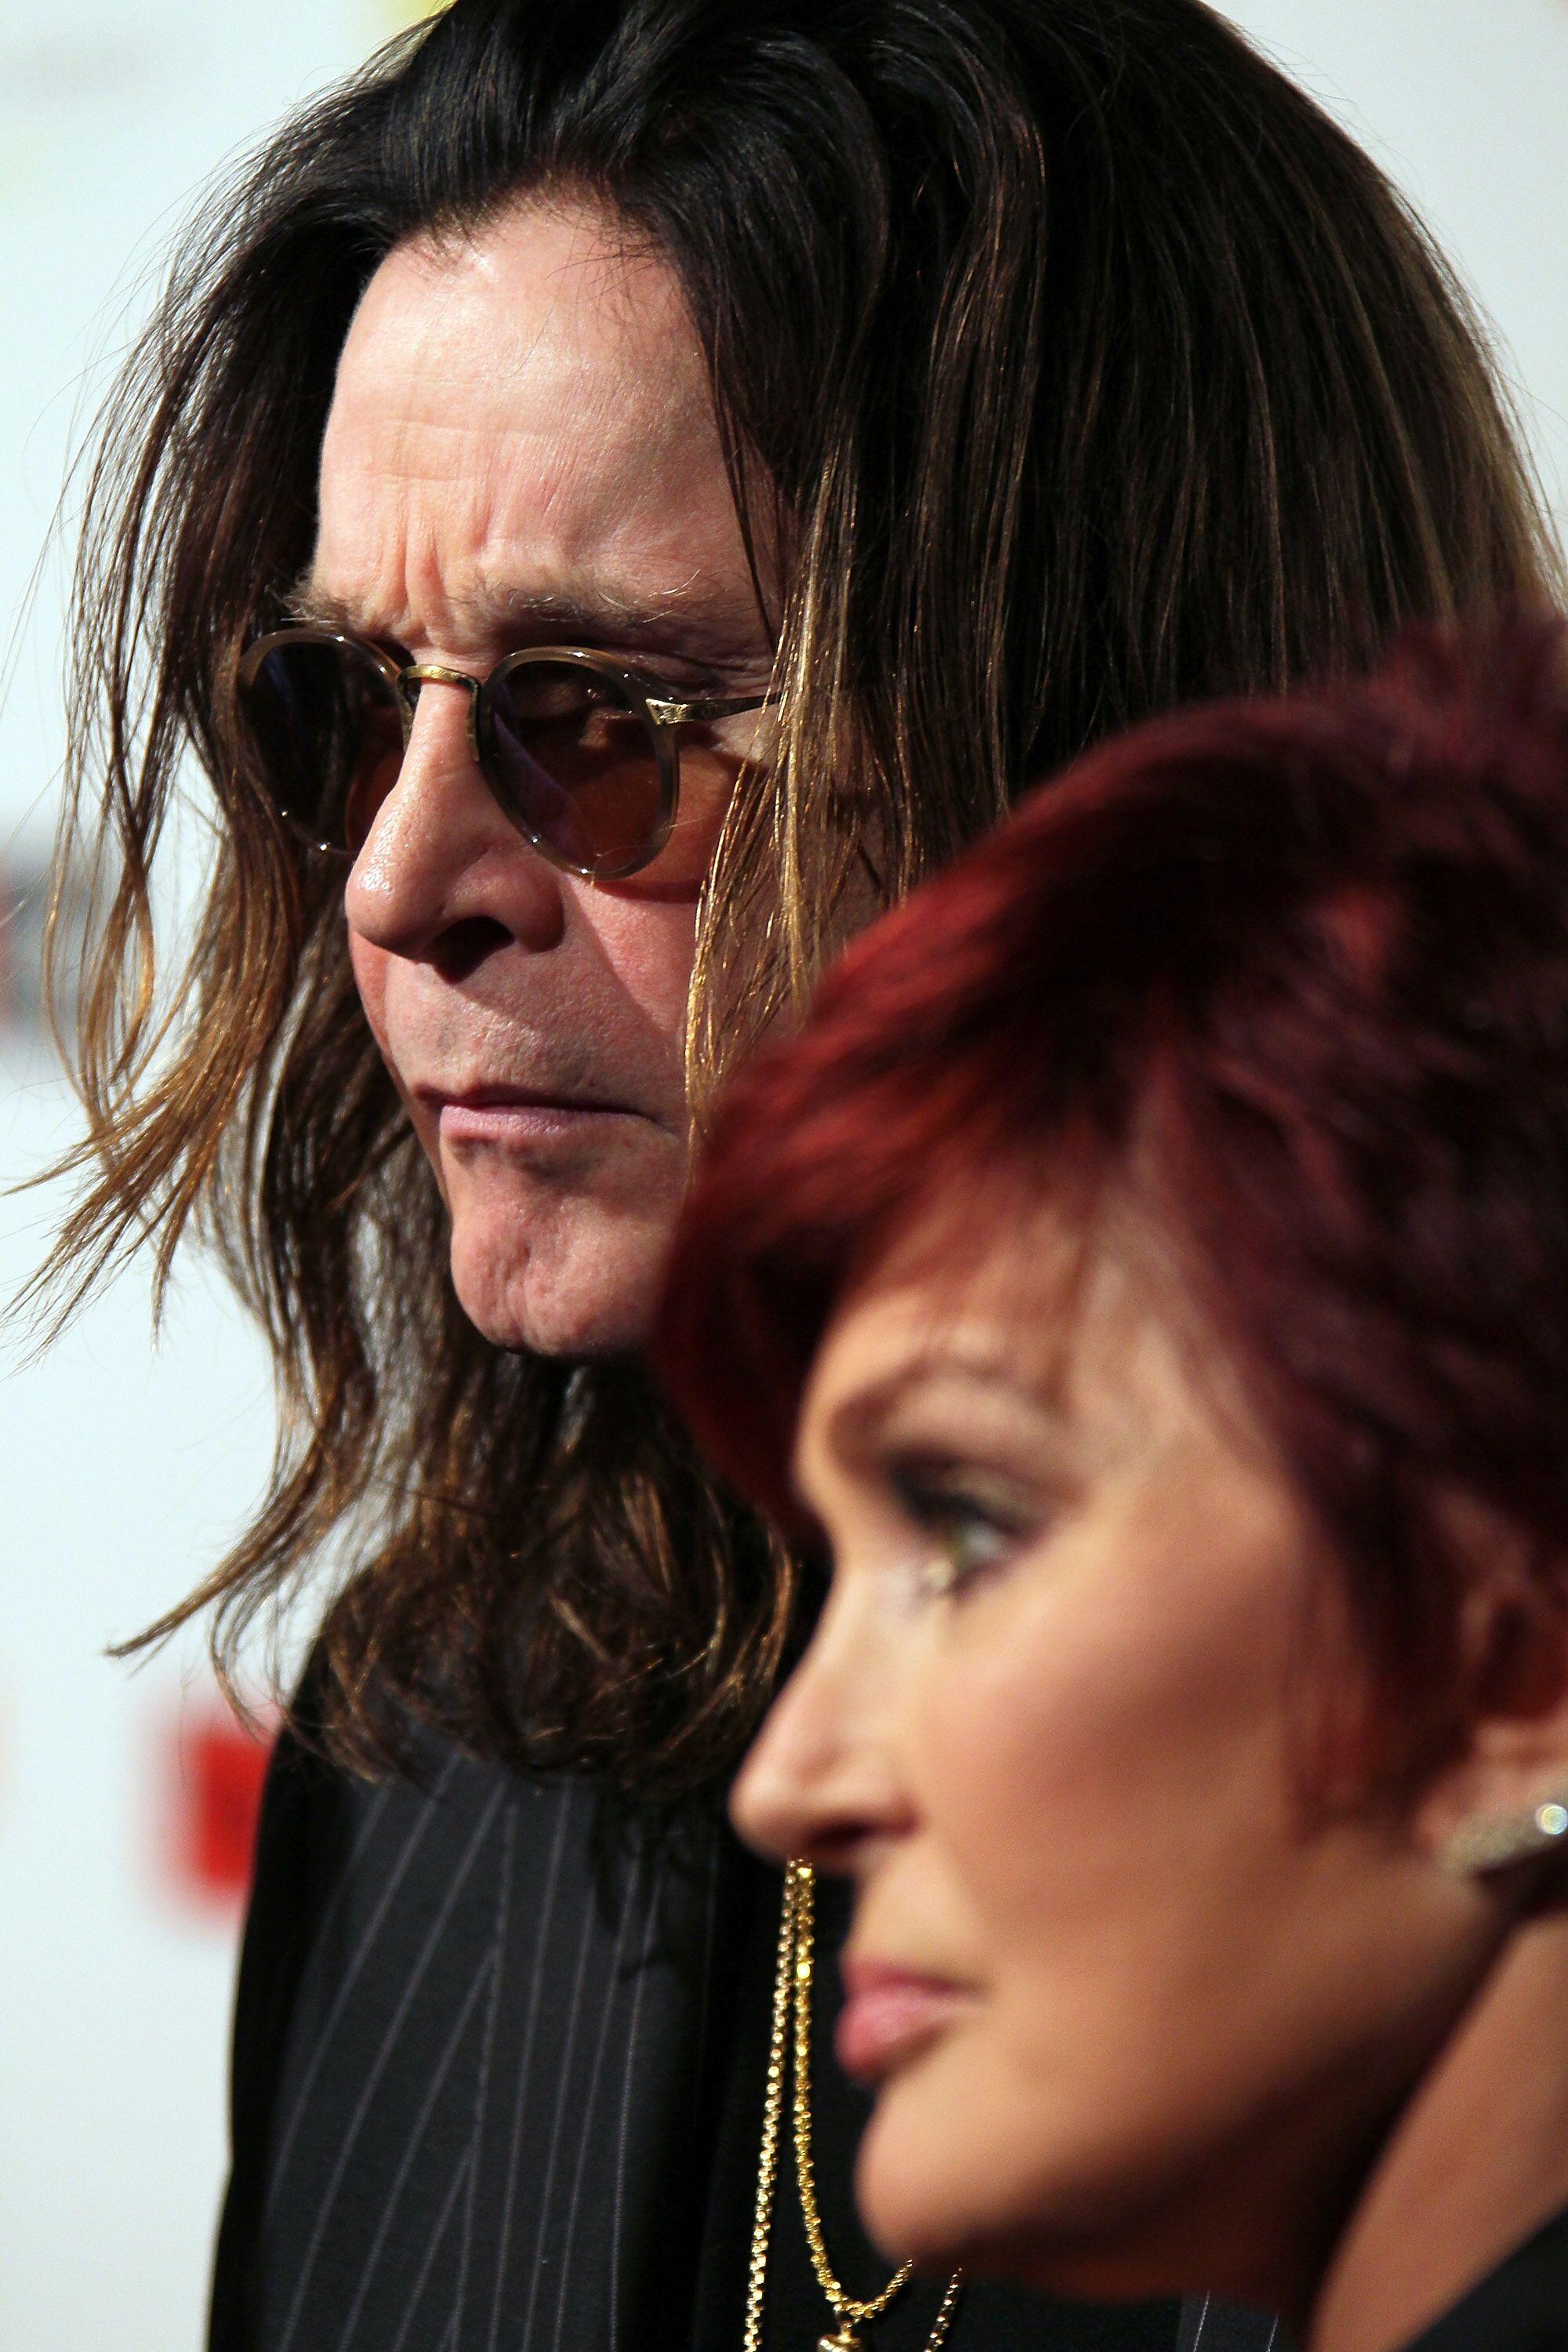 Ozzy Osbourne and Sharon Osbourne attend the 10th Annual Classic Rock Awards. | Source: Getty Images